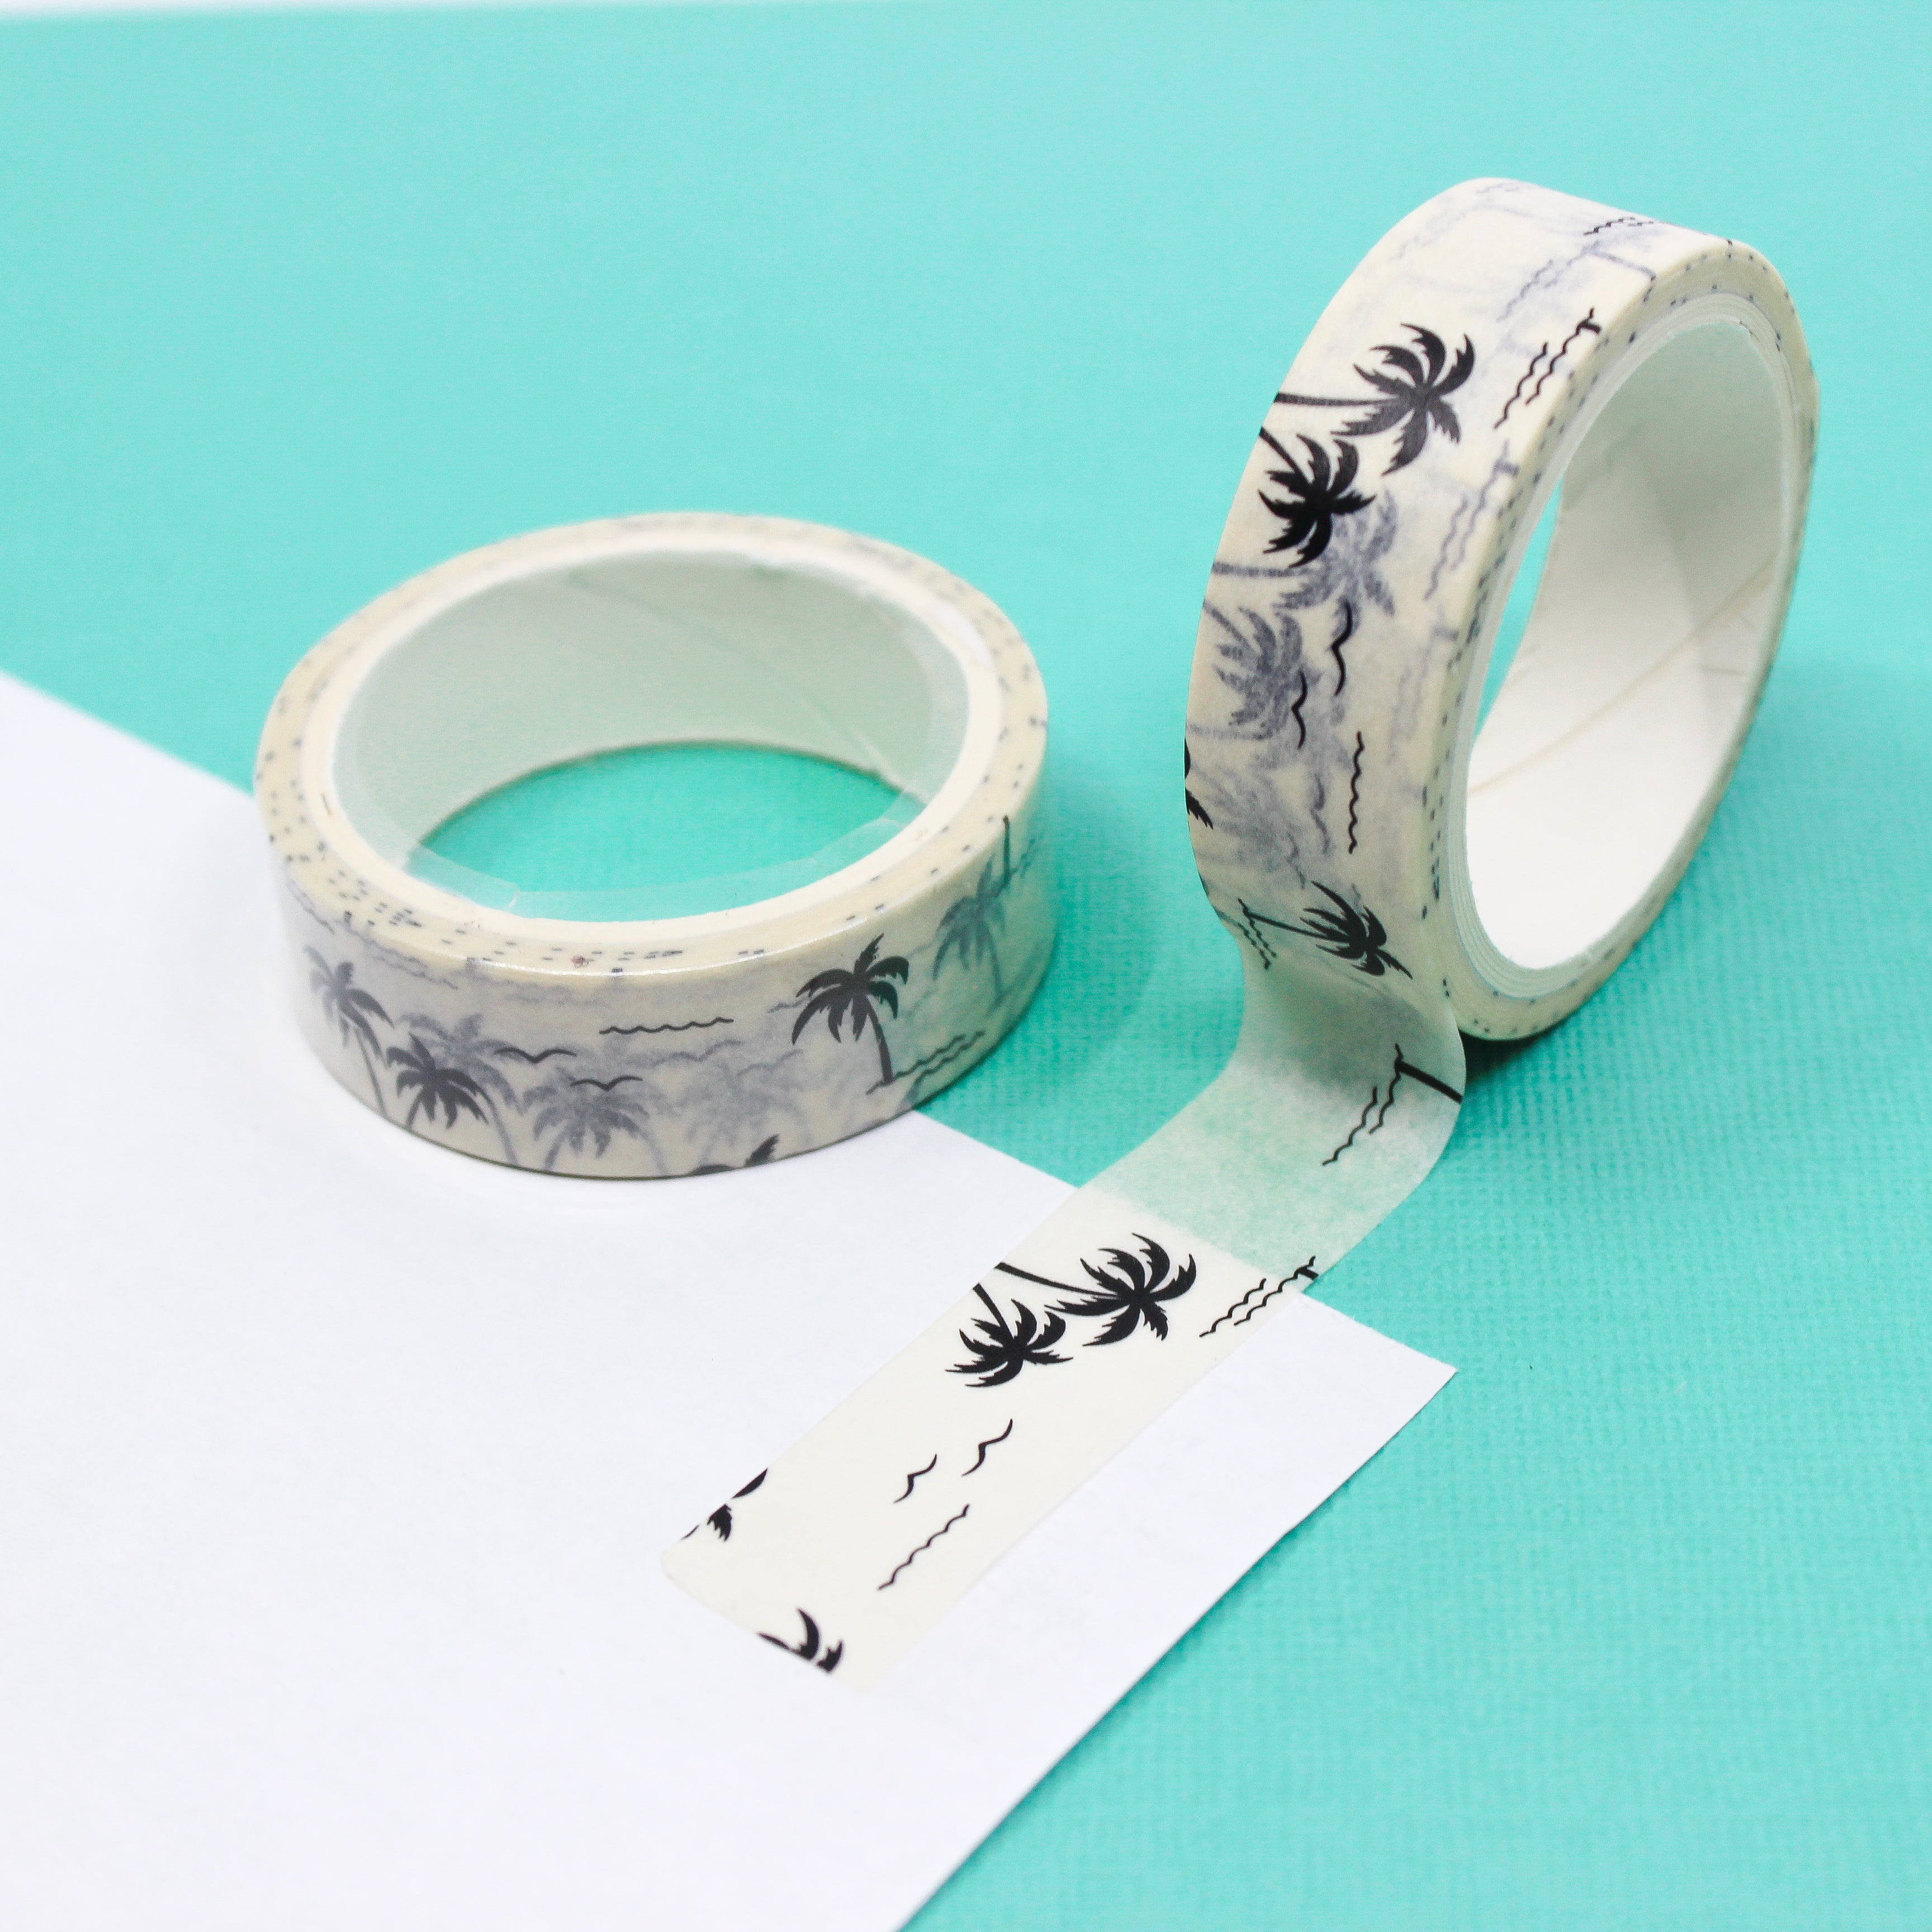 This is a white palm tree view themed washi tape from BBB Supplies Craft Shop